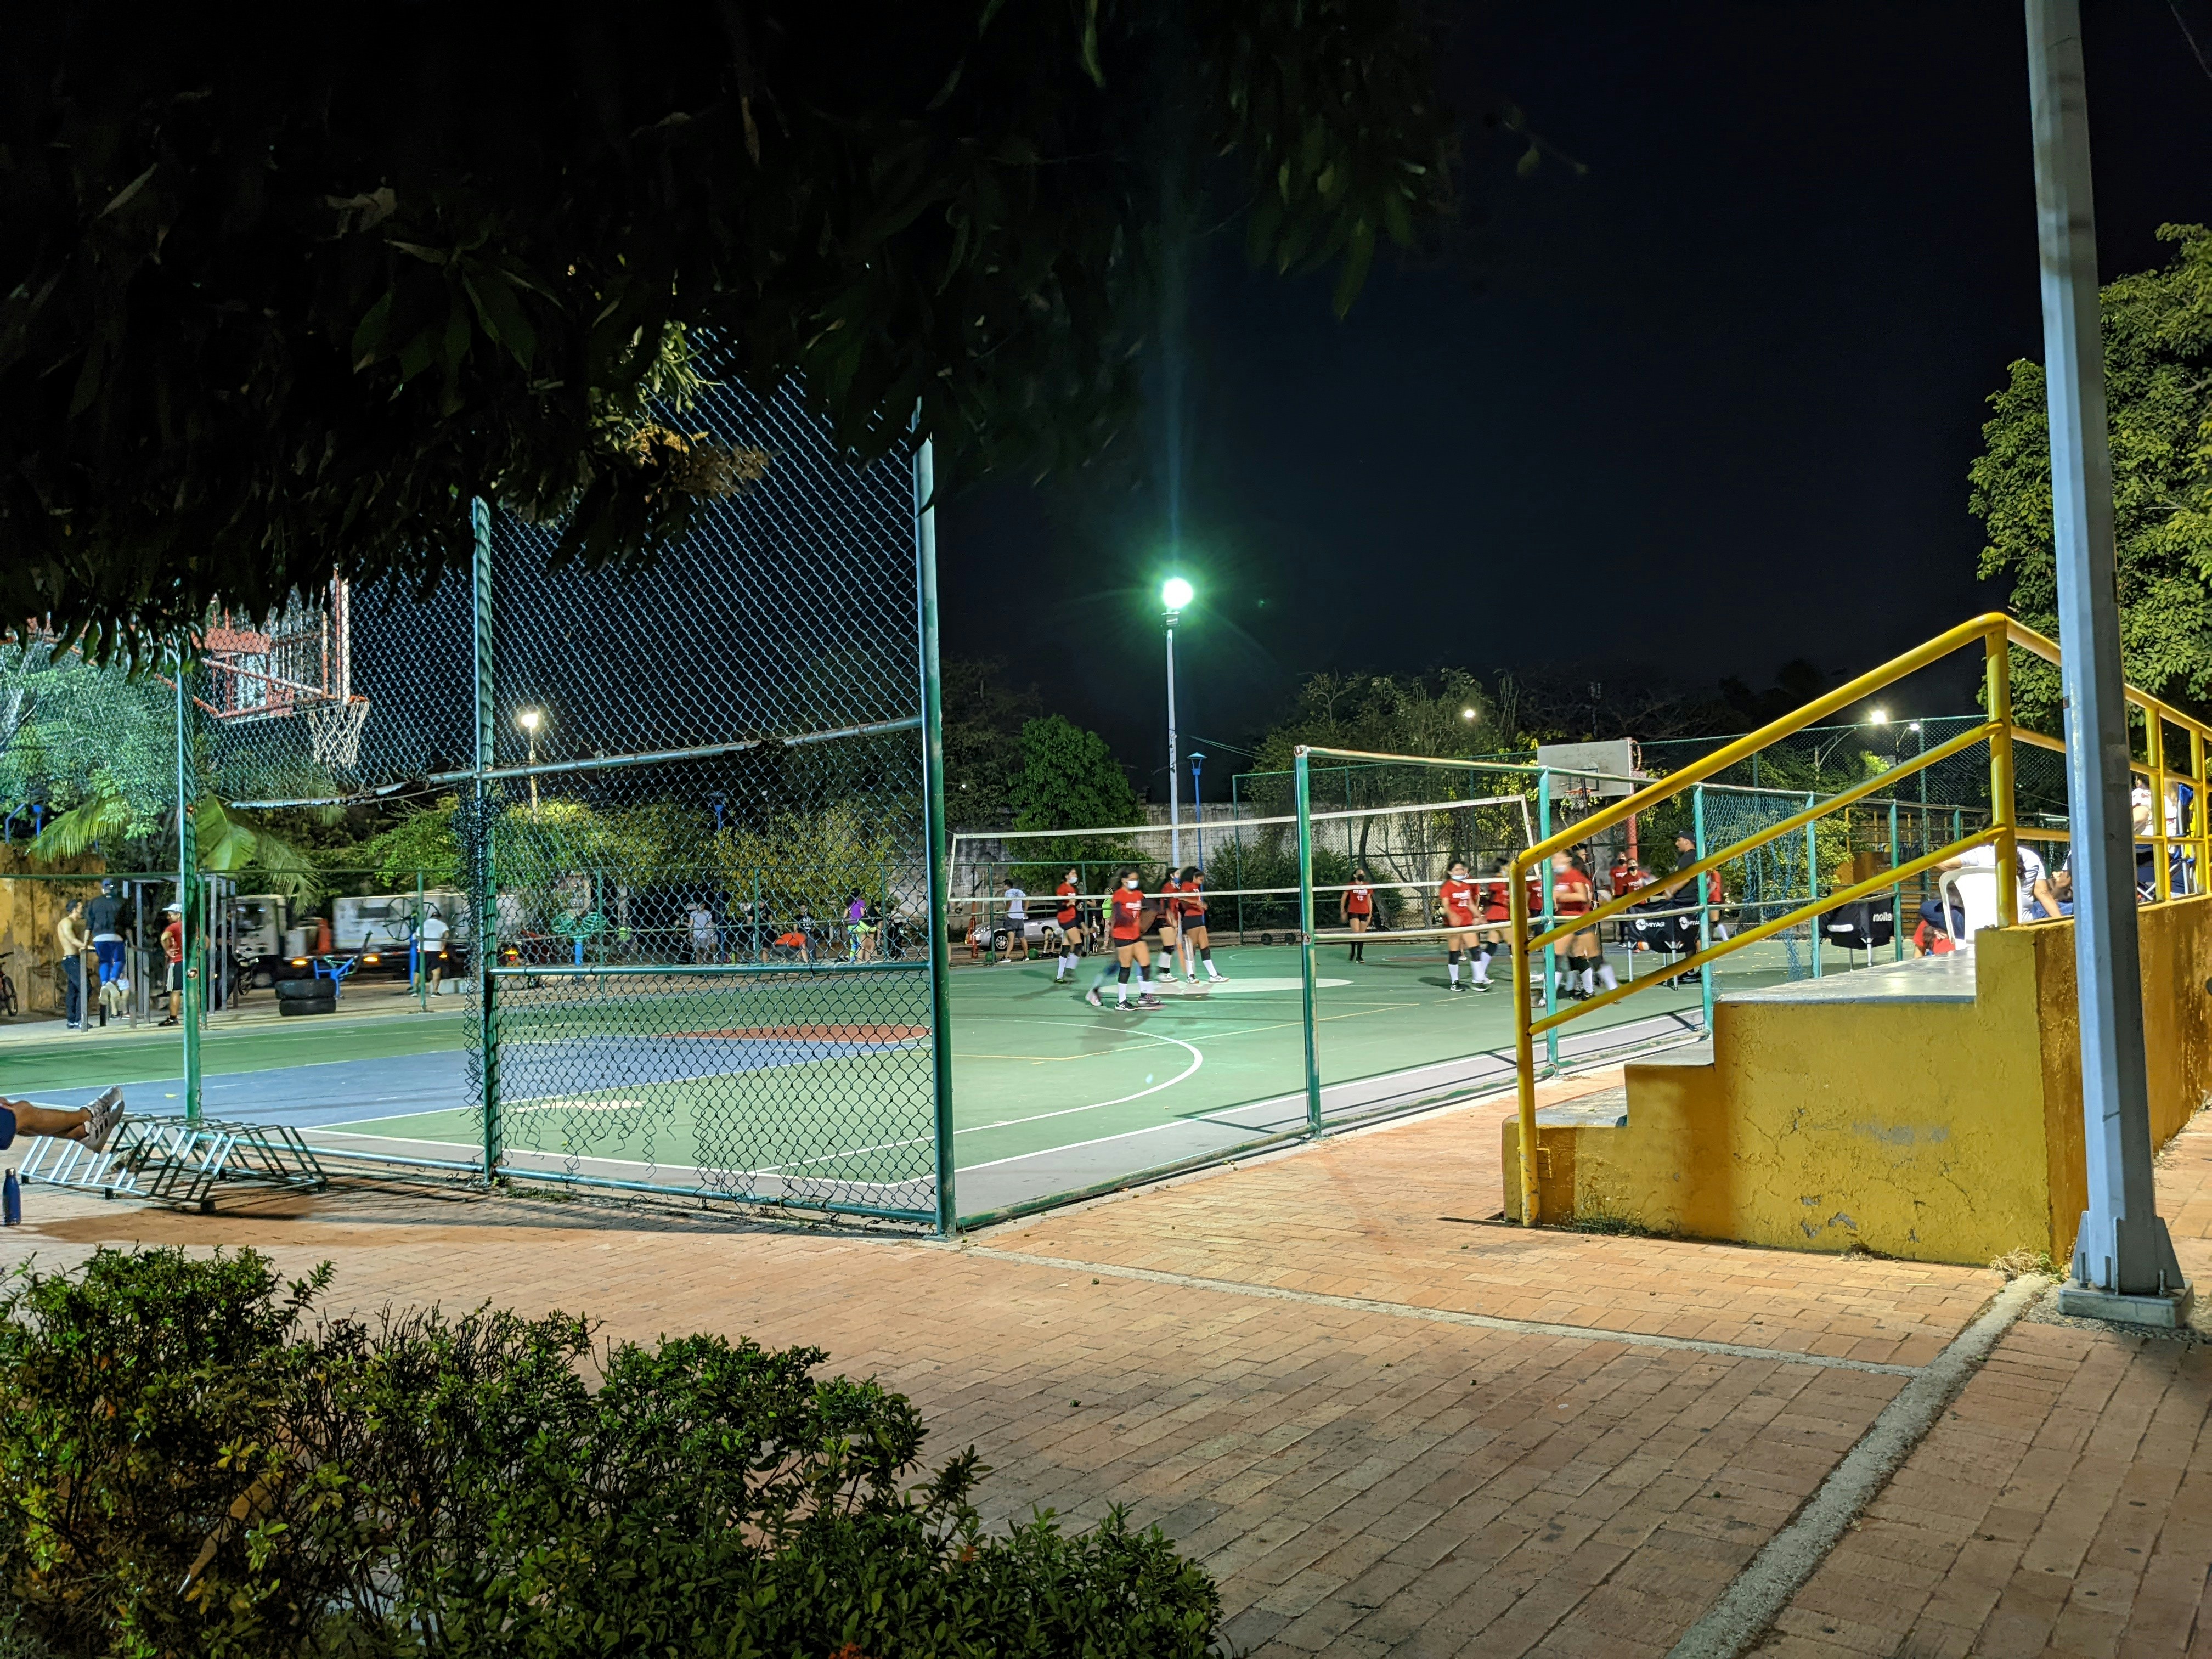 Volleyball game in Cartagena, Colombia